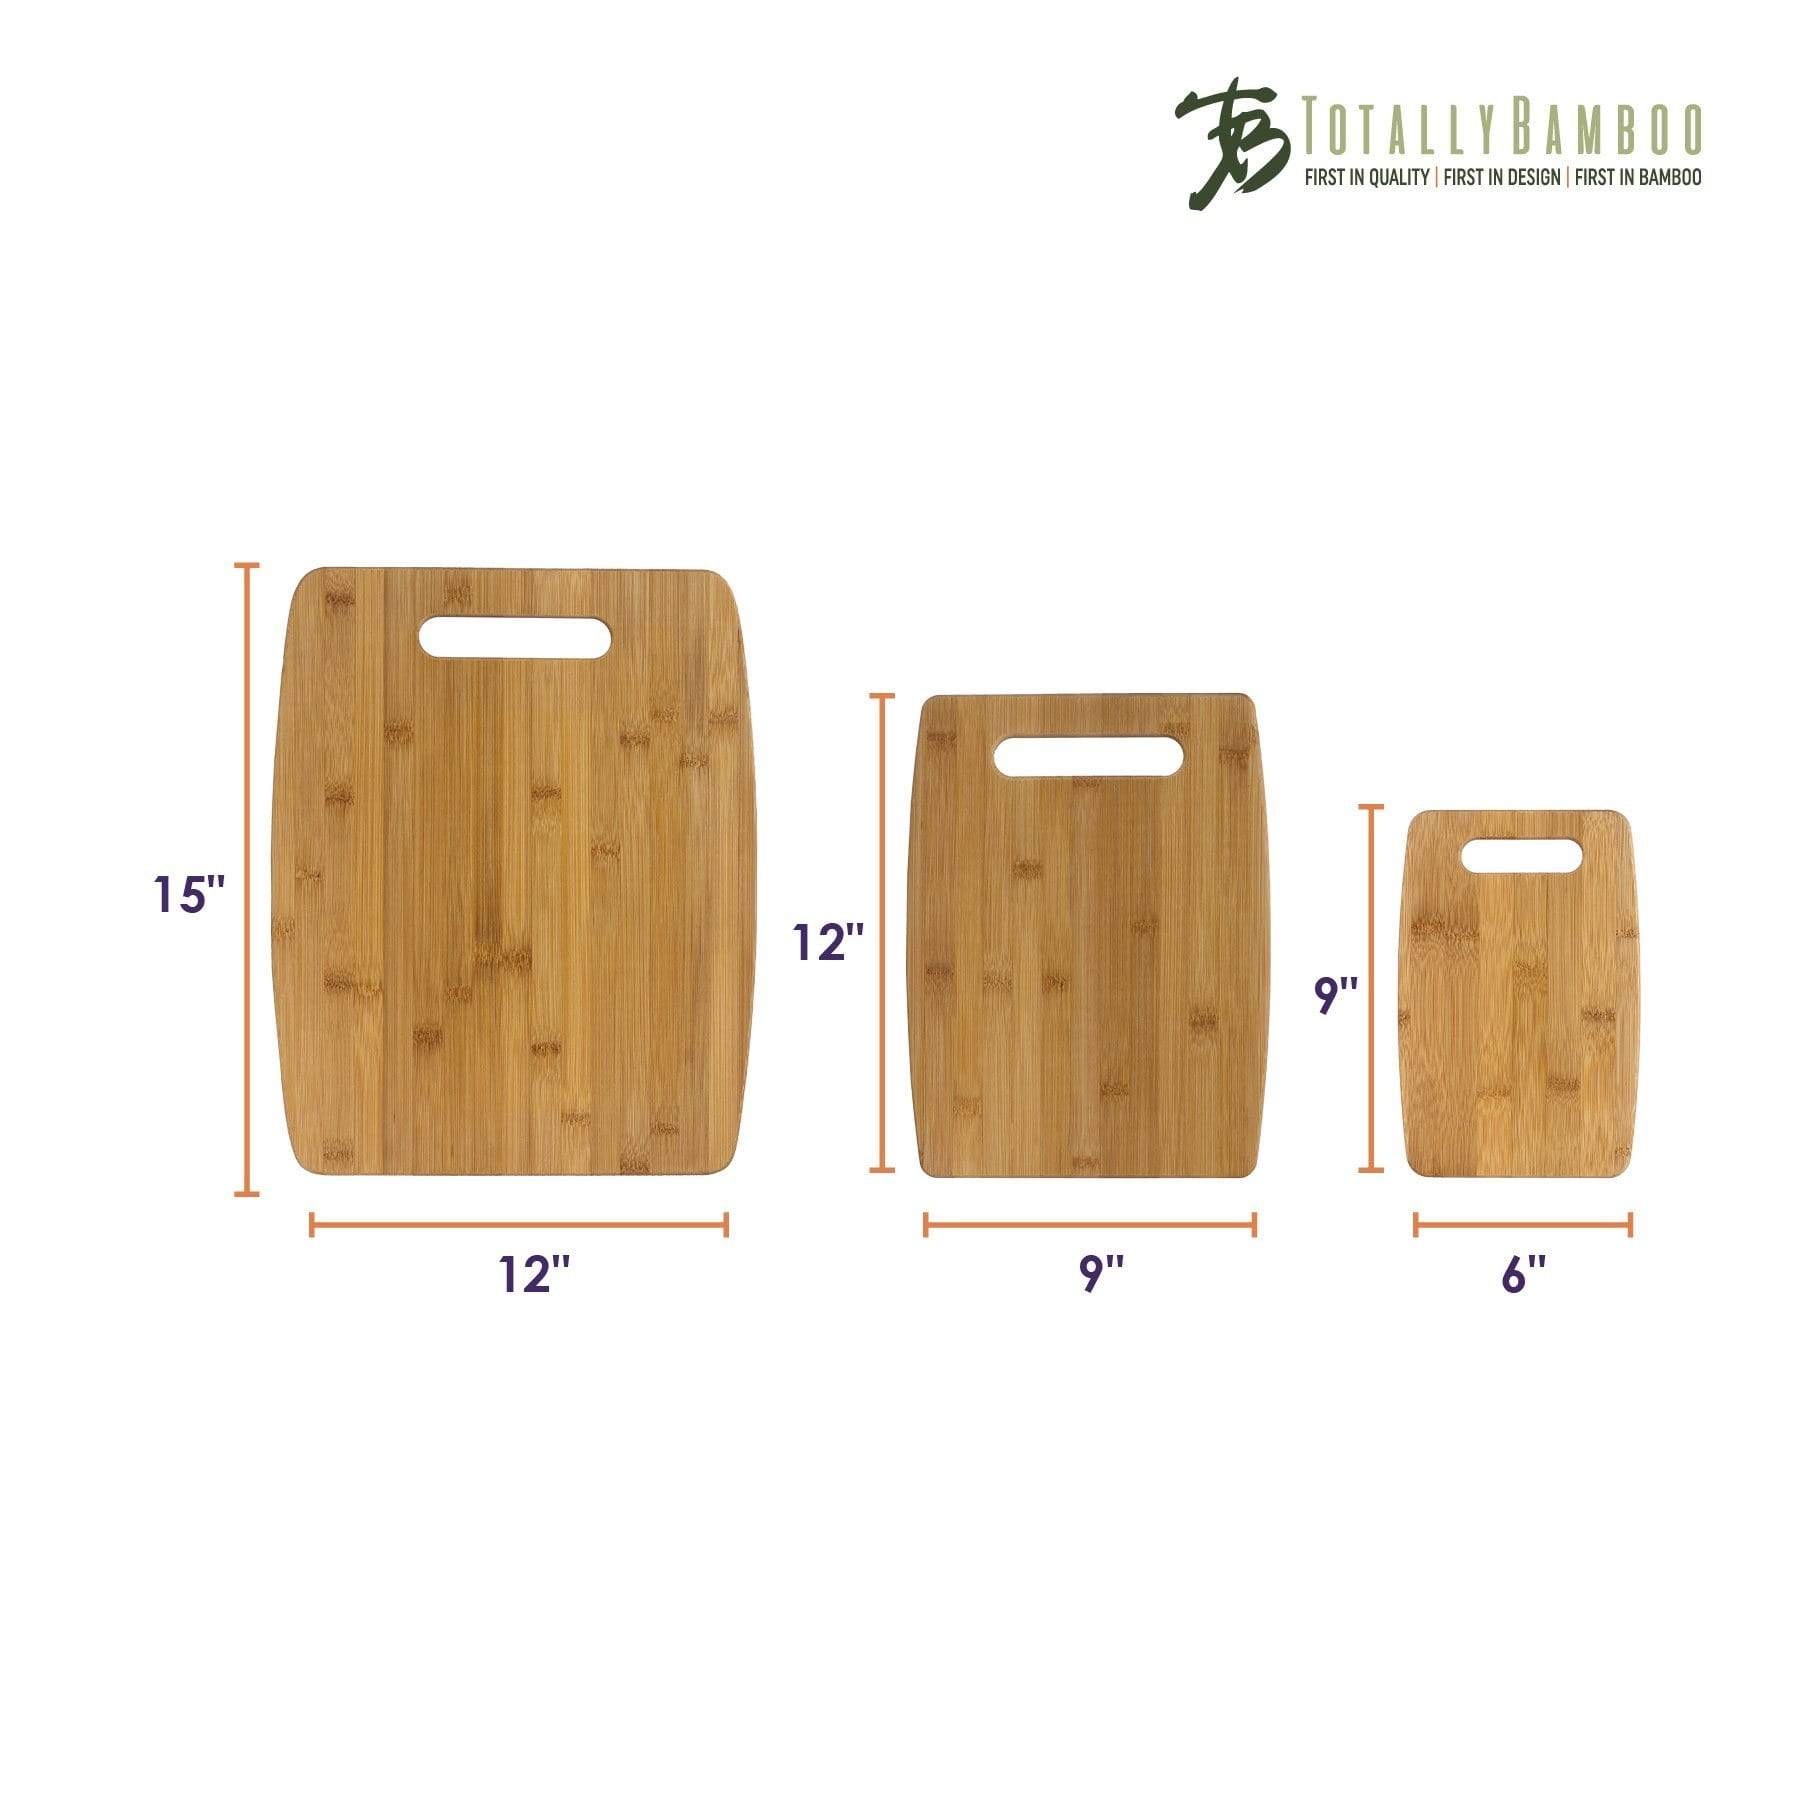 Imperial Home Bamboo Cutting Boards - Set of 3